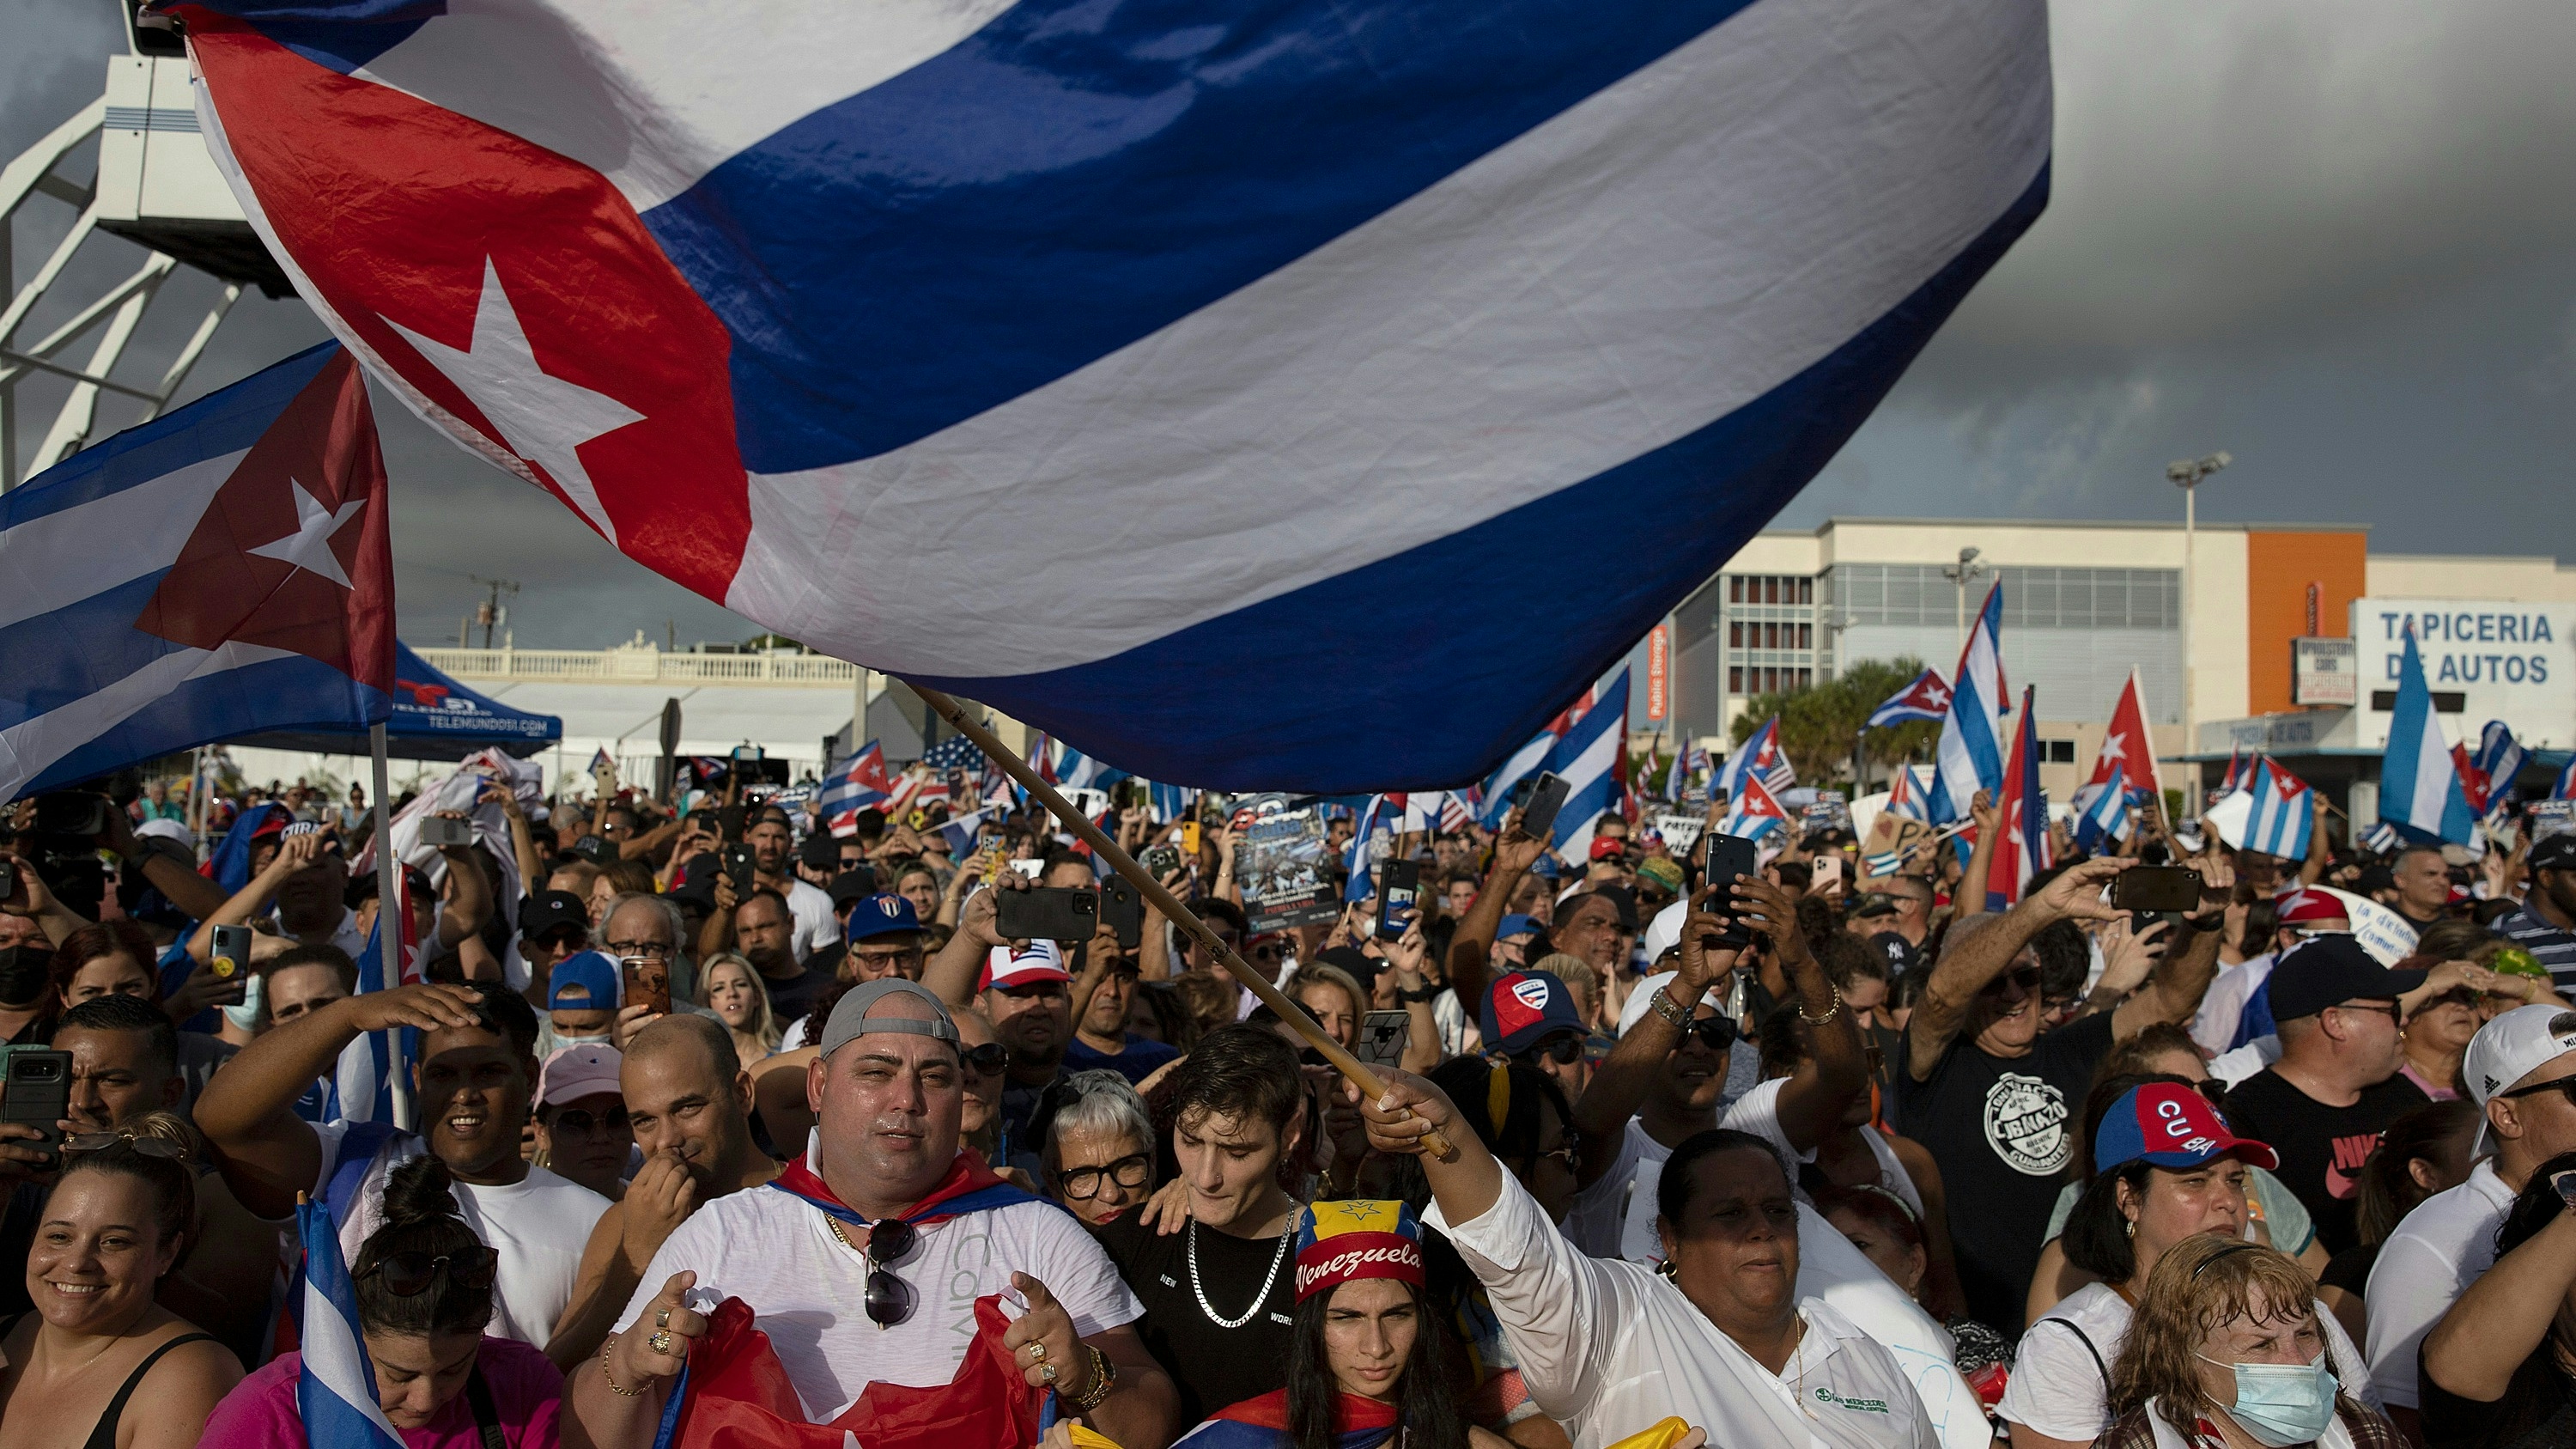 Protesters gather in front of the Versailles restaurant in the Little Havana neighborhood to show their support for the people in Cuba that have taken to the streets to protest.